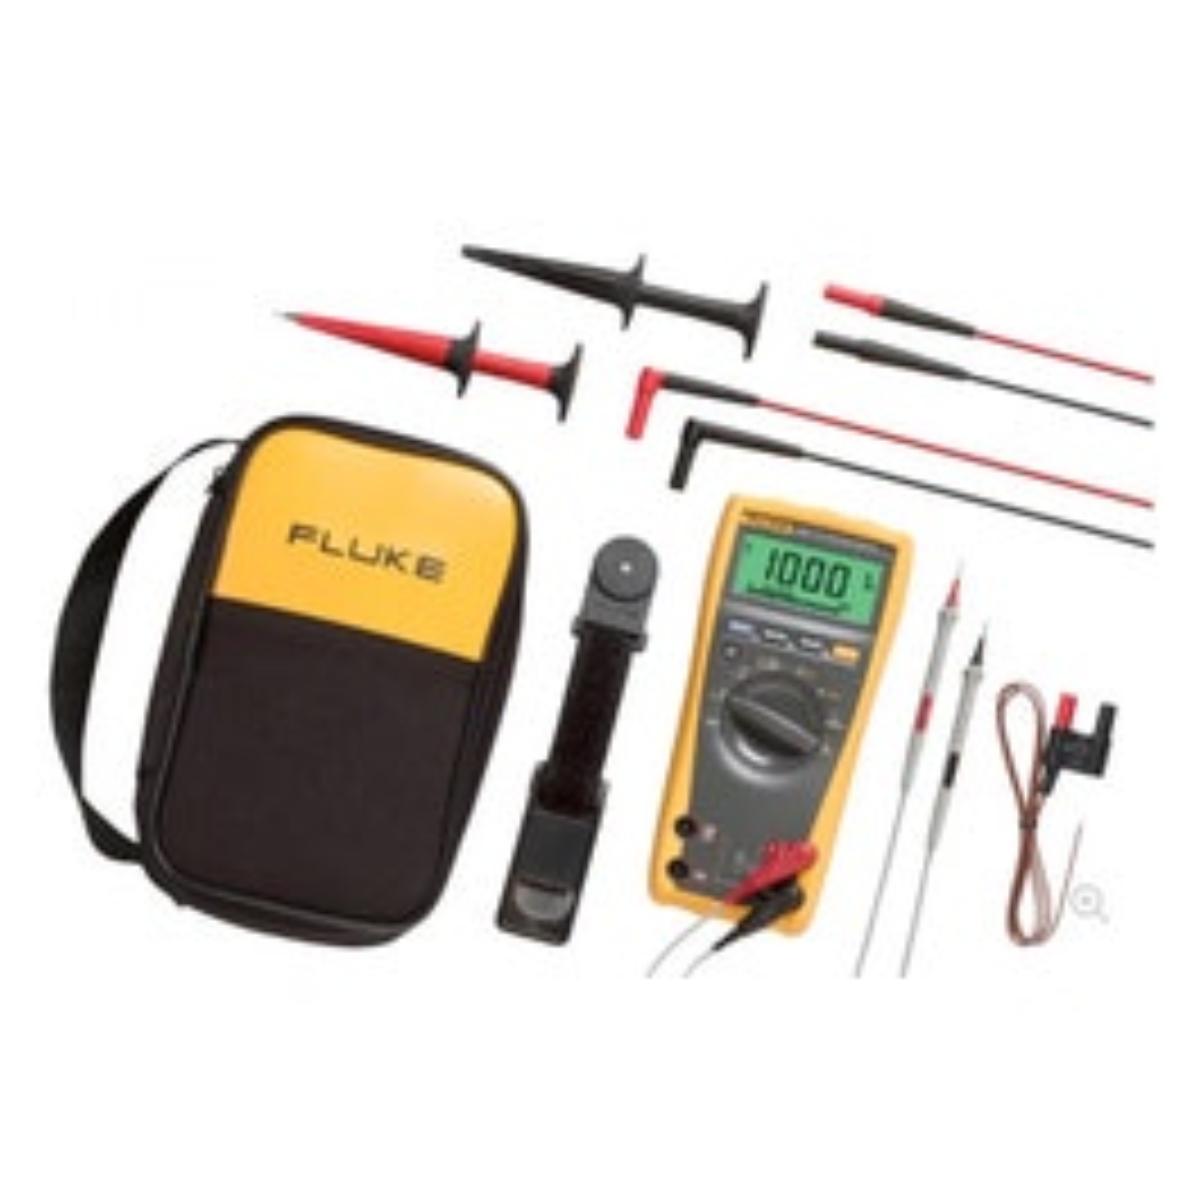 DIGITAL MULTIMETER AND ACCESSORY KIT